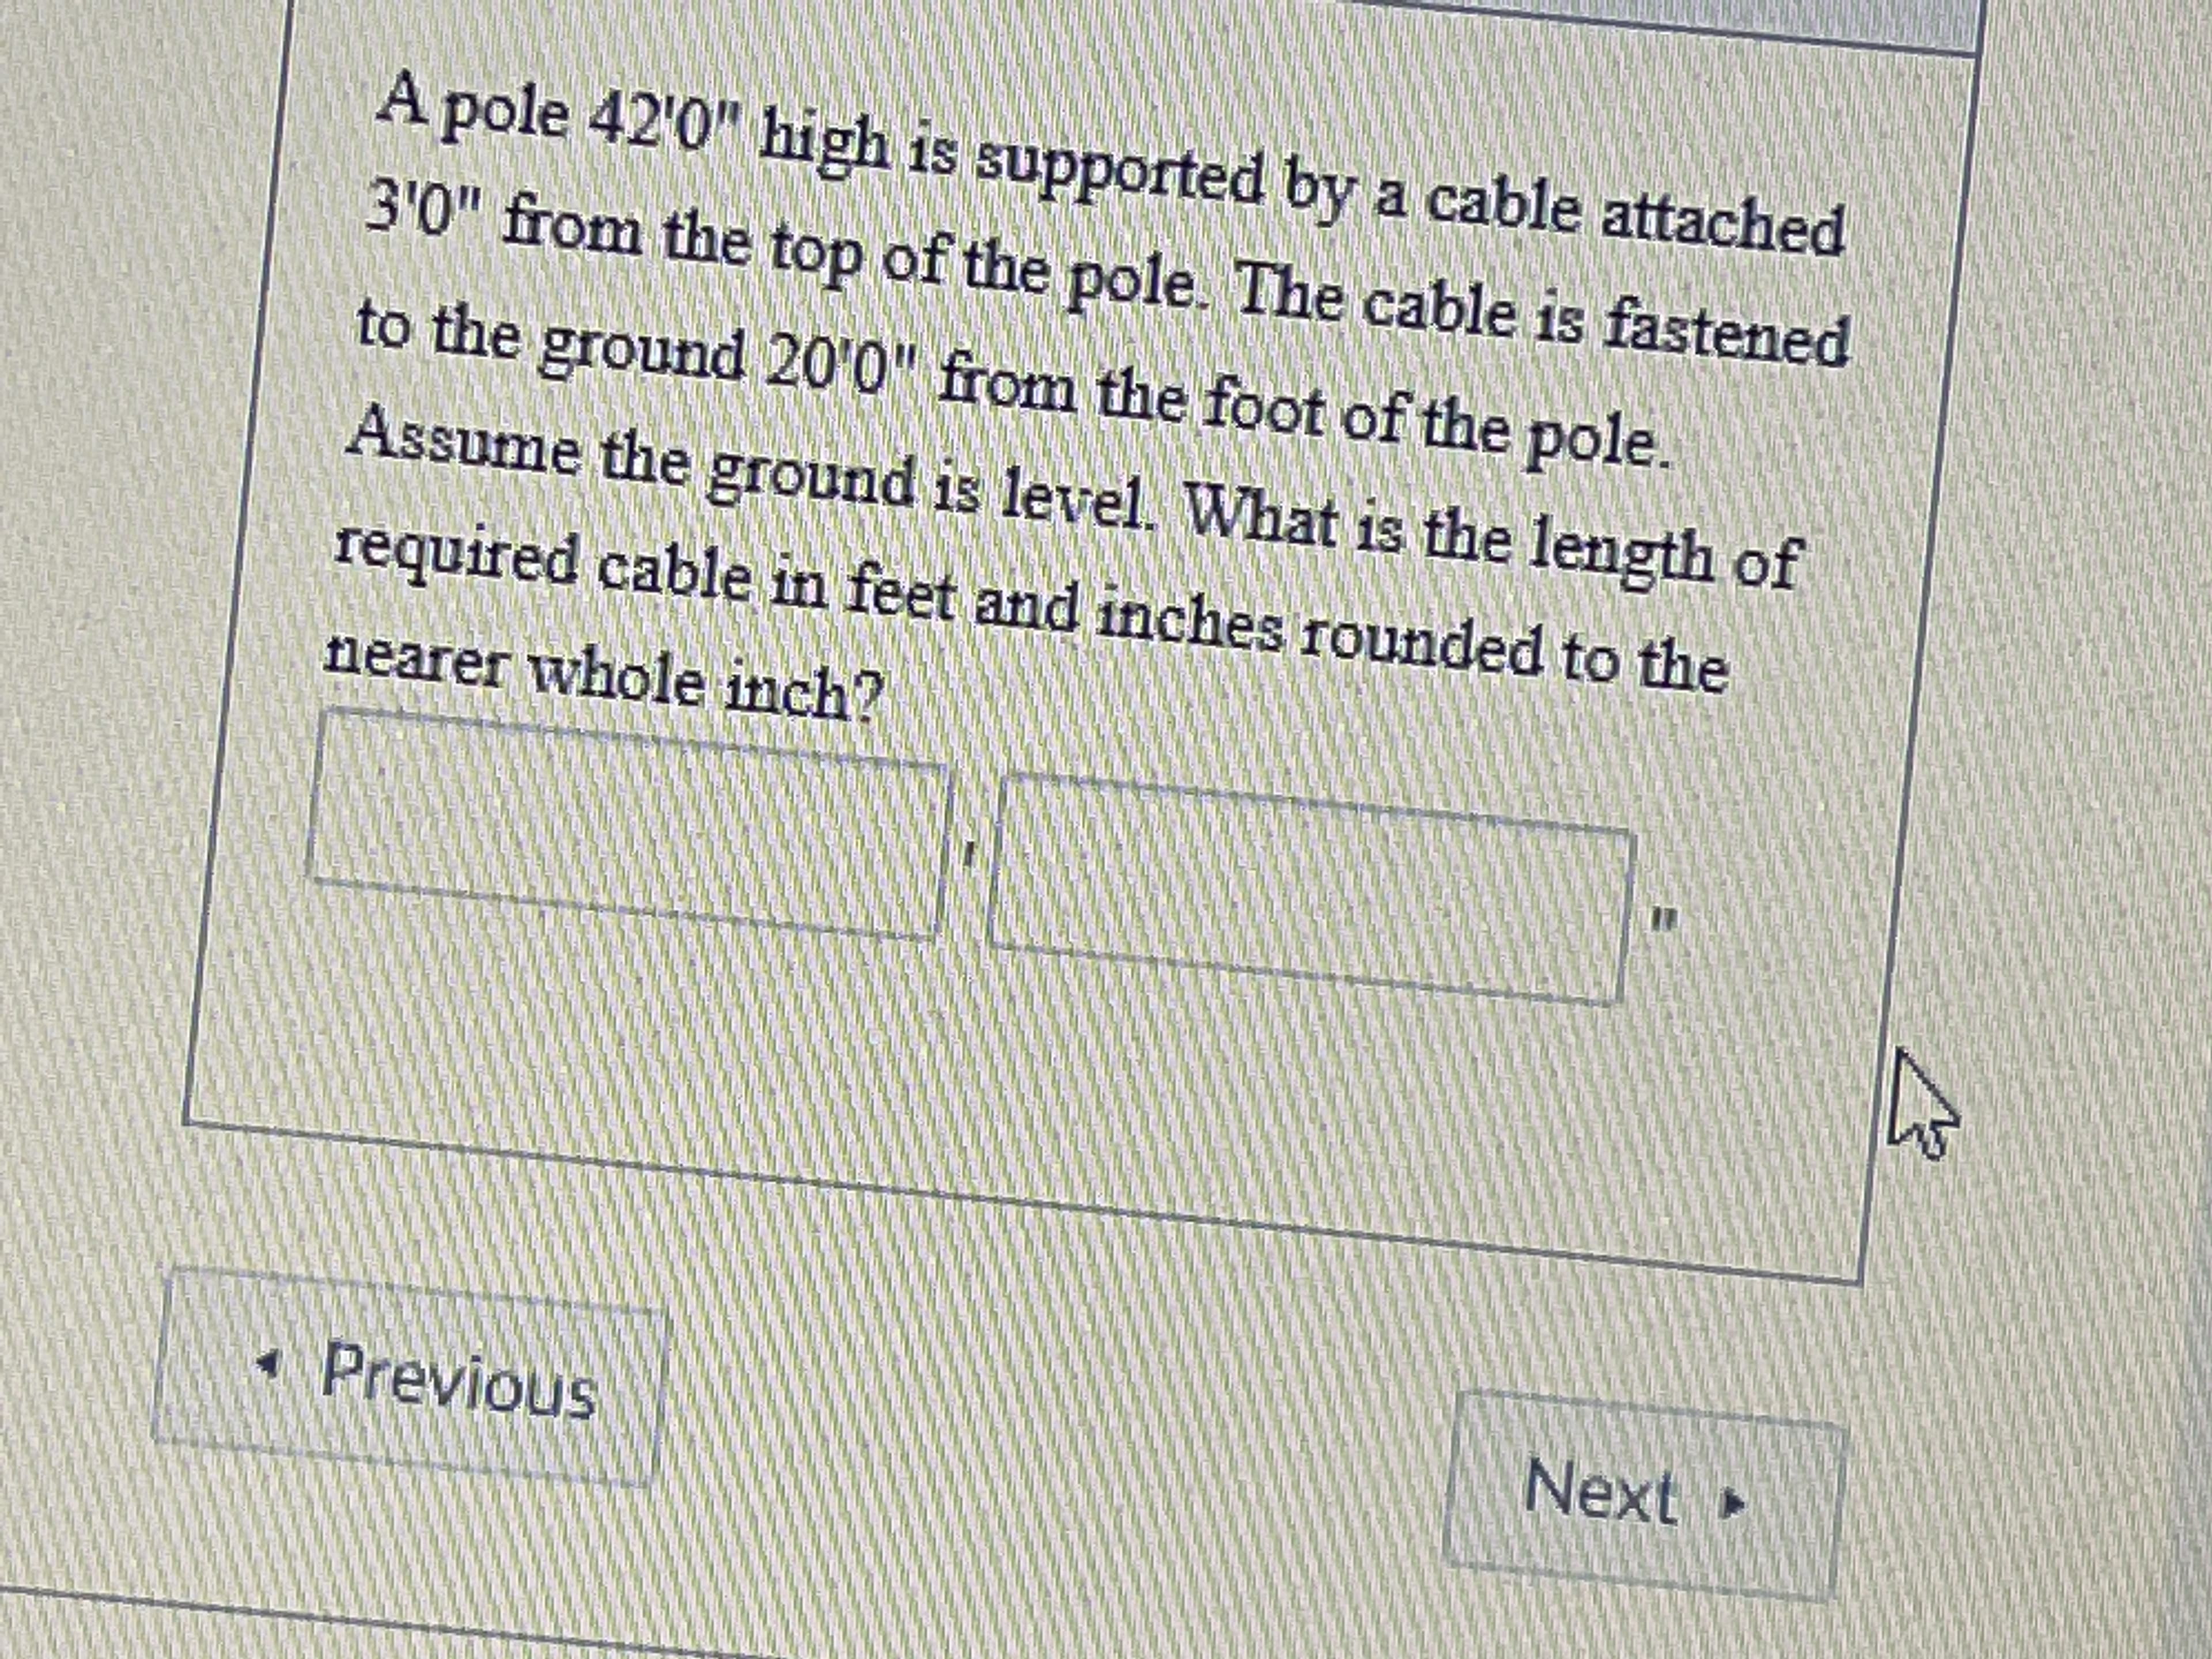 A pole 42'0" high is supported by a cable attached
3'0" from the top of the pole. The cable is fastened
to the ground 20'0" from the foot of the pole.
Assume the ground is level. What is the length of
required cable in feet and inches rounded to the
nearer whole inch?
*Previous
Next
►
